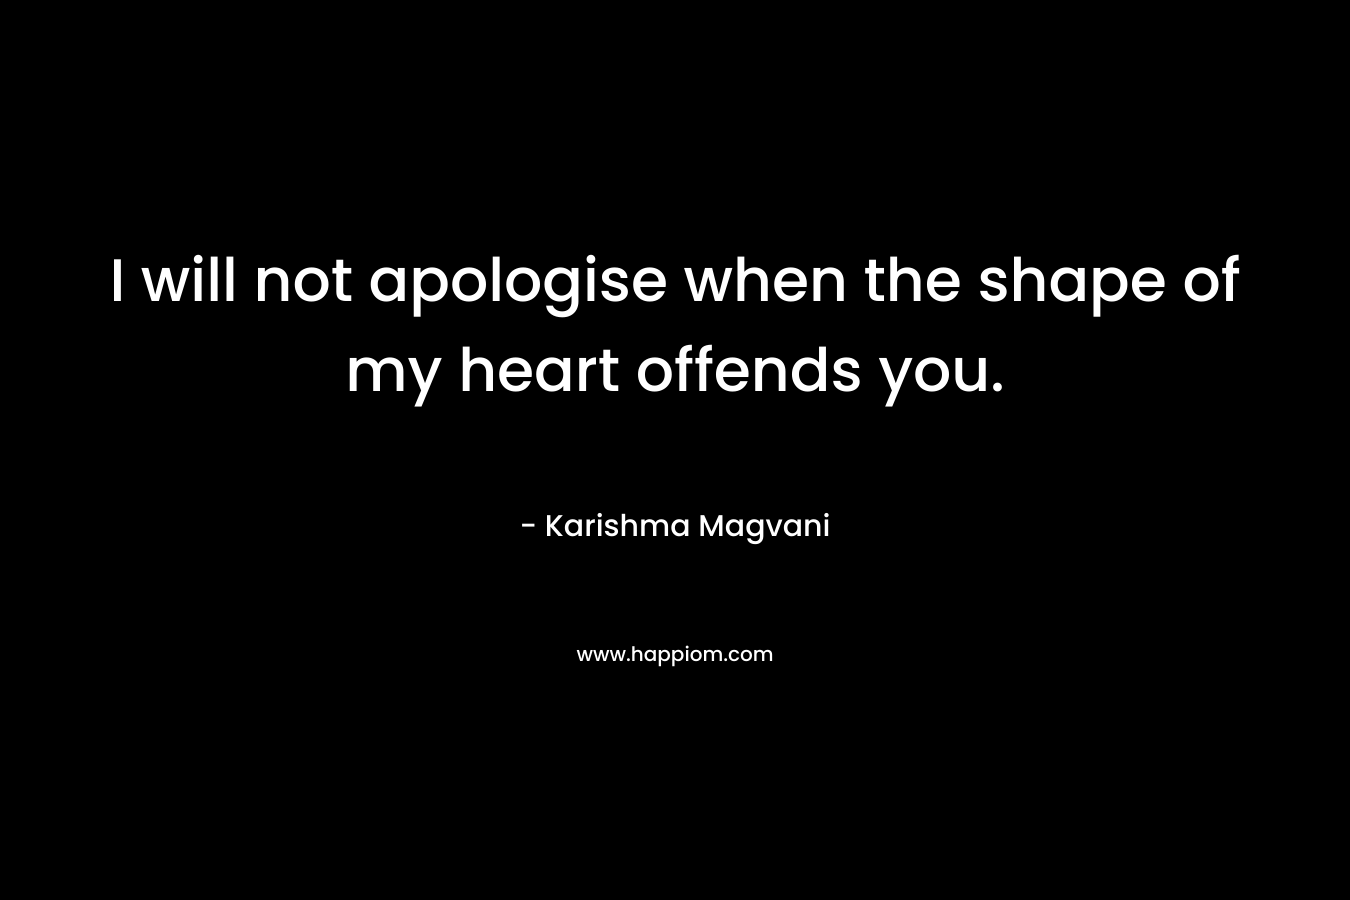 I will not apologise when the shape of my heart offends you. – Karishma Magvani